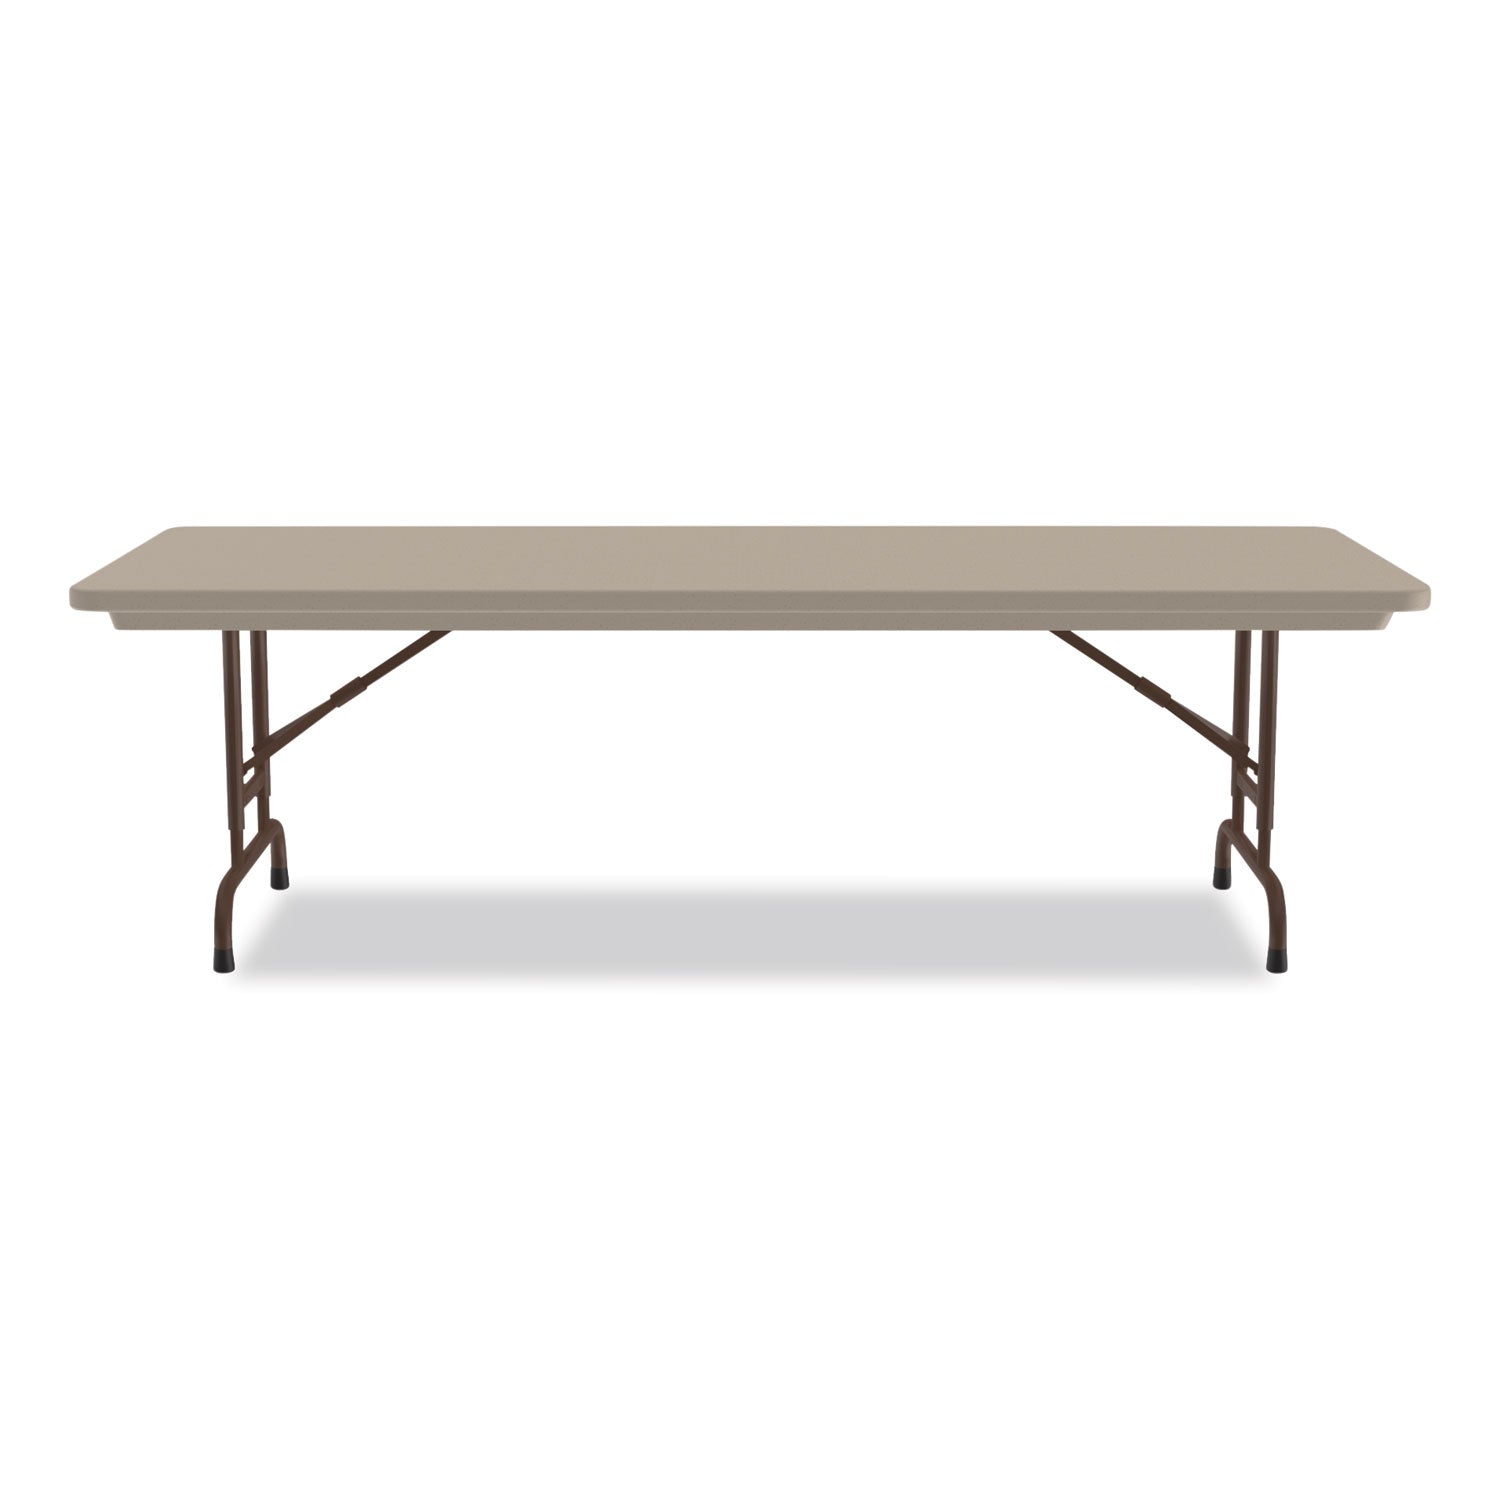 adjustable-folding-tables-rectangular-72-x-30-x-22-to-32-mocha-top-brown-legs-4-pallet-ships-in-4-6-business-days_crlra3072244p - 3